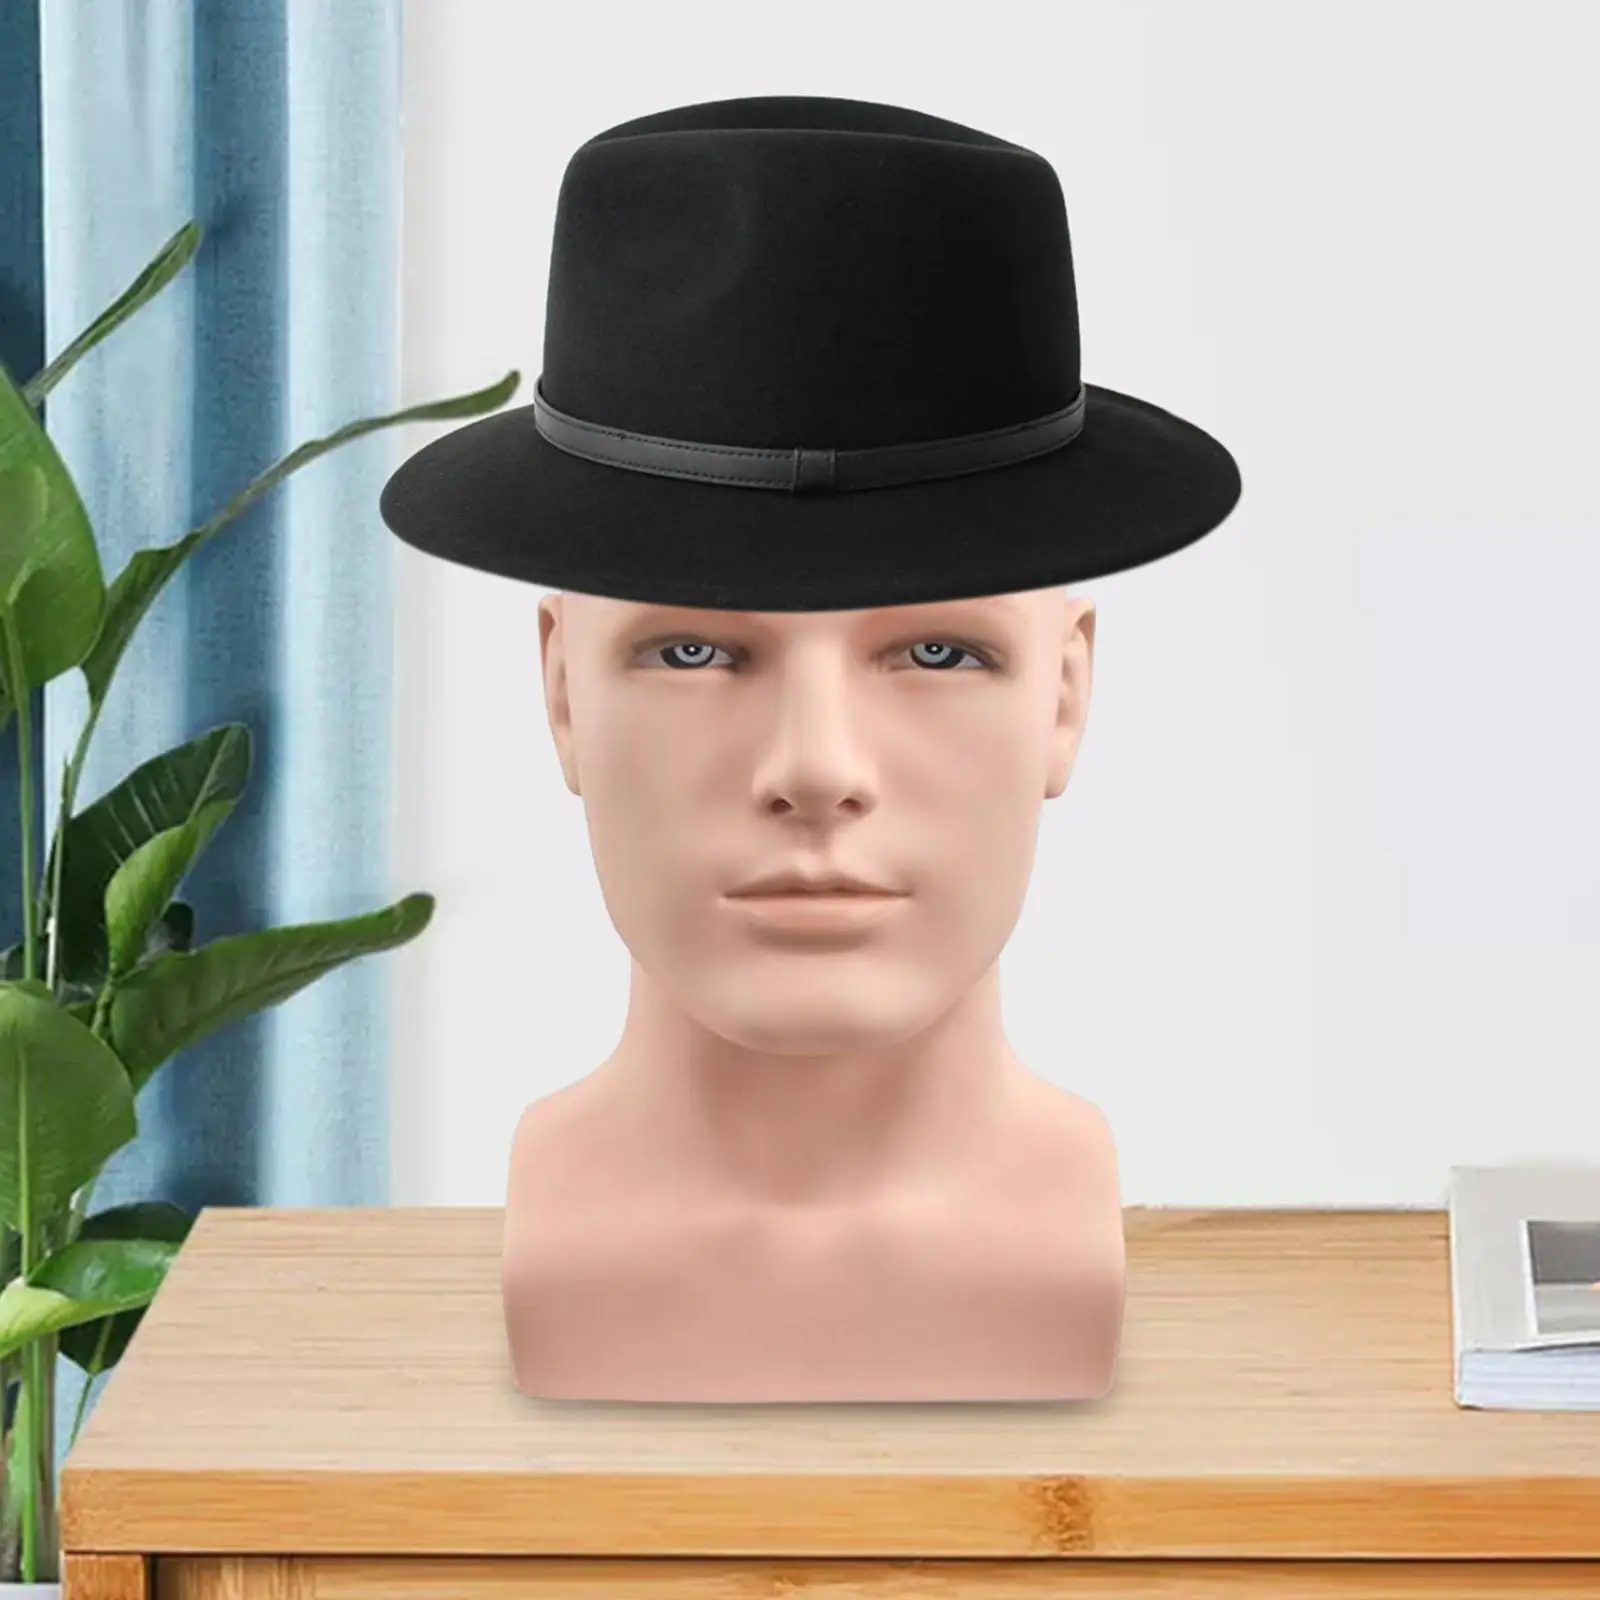 pvc Mannequin Head, Head Bust Show Head Male head Display Stand Display Prop for Hat Necklace Chain Headphone Stand Holder